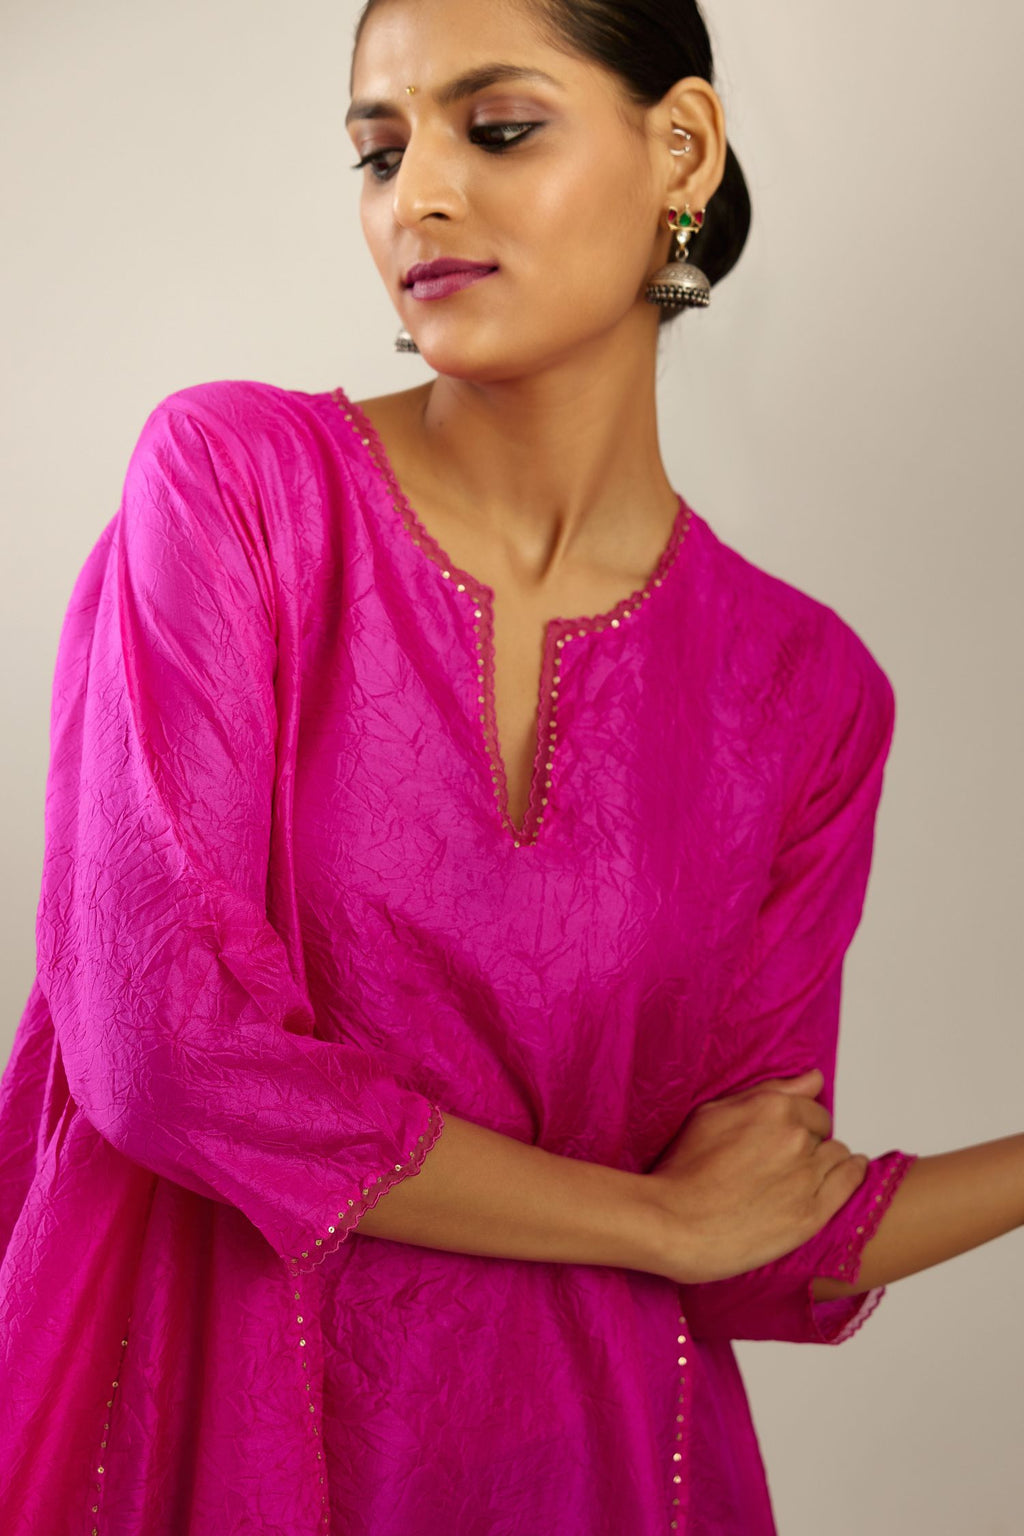 Fiji fuchsia hand crushed silk kurta set with asymmetric hem, highlighted with gold sequins and embroidered scalloped organza at edges.